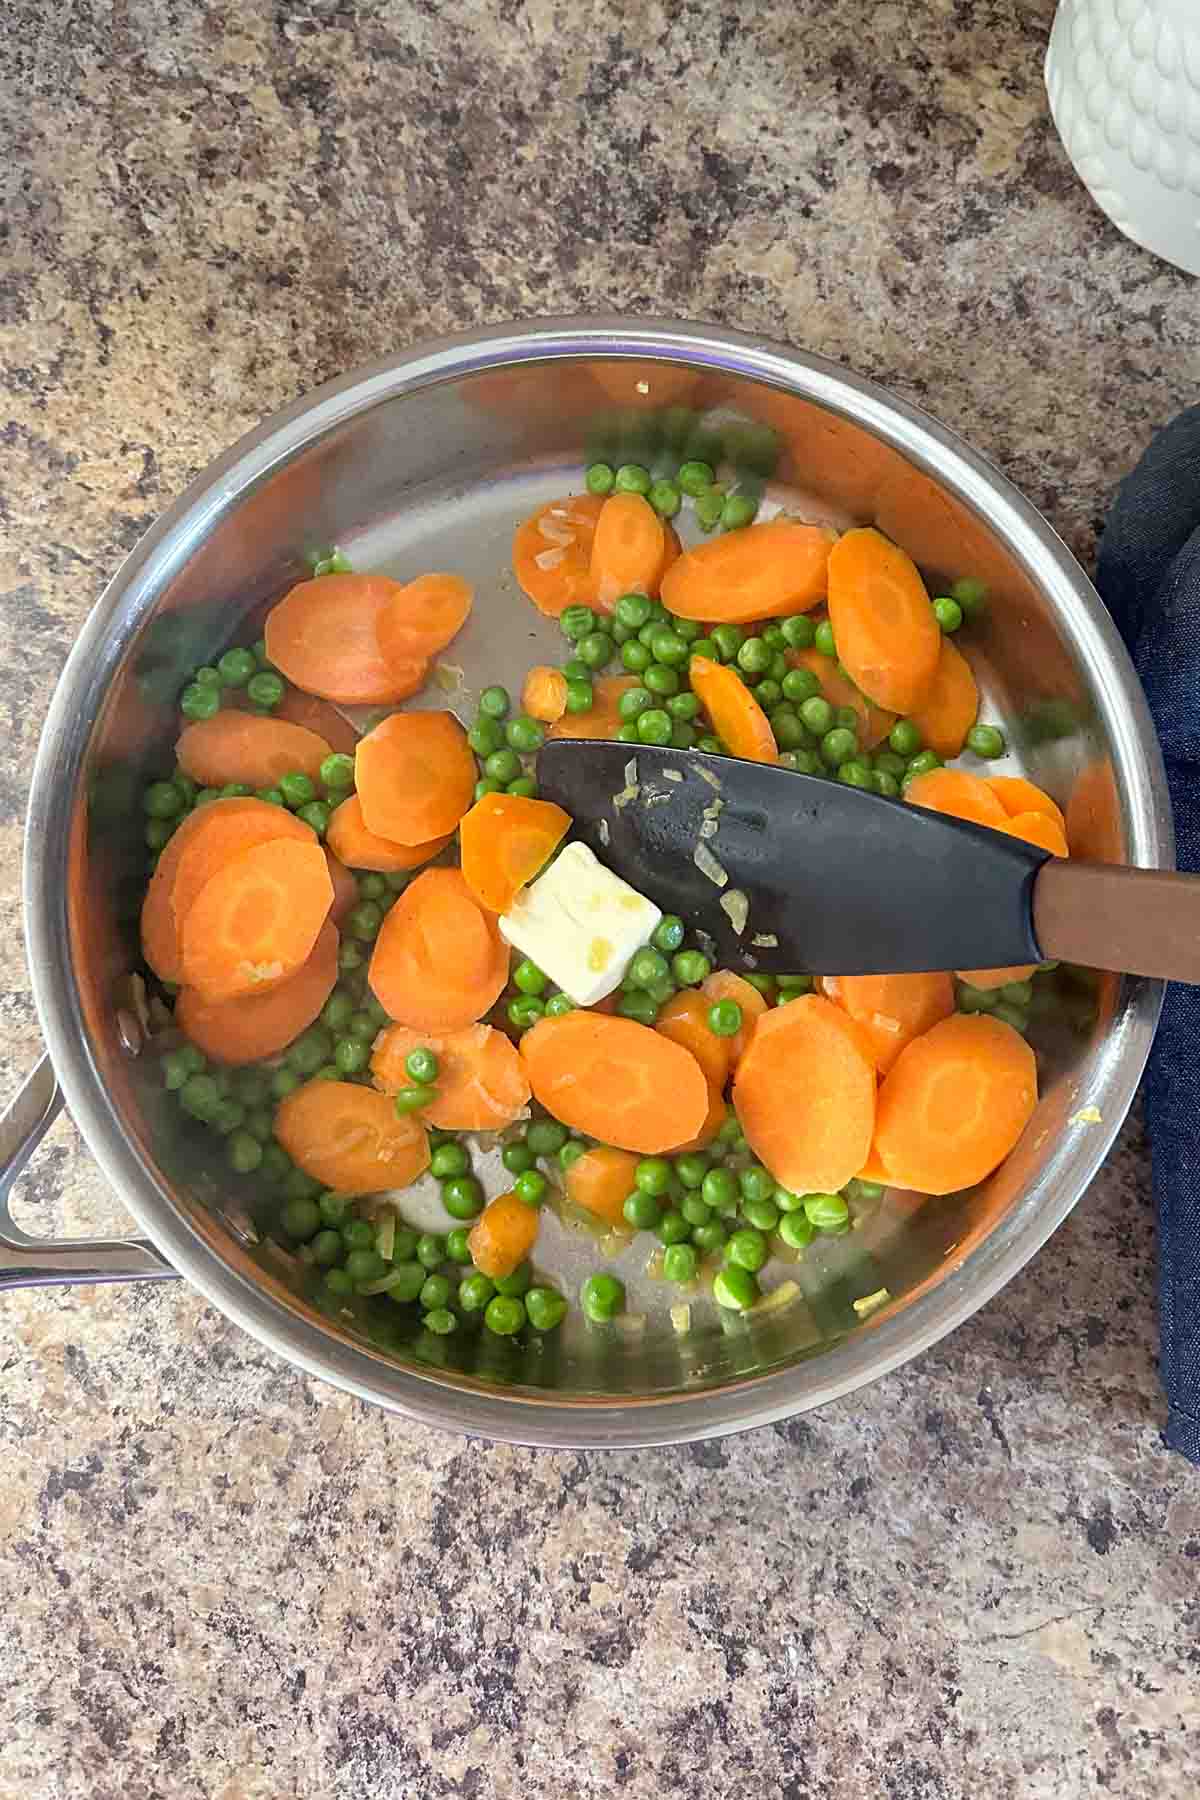 Sliced carrots and peas in a stainless steel pan with a spatula.